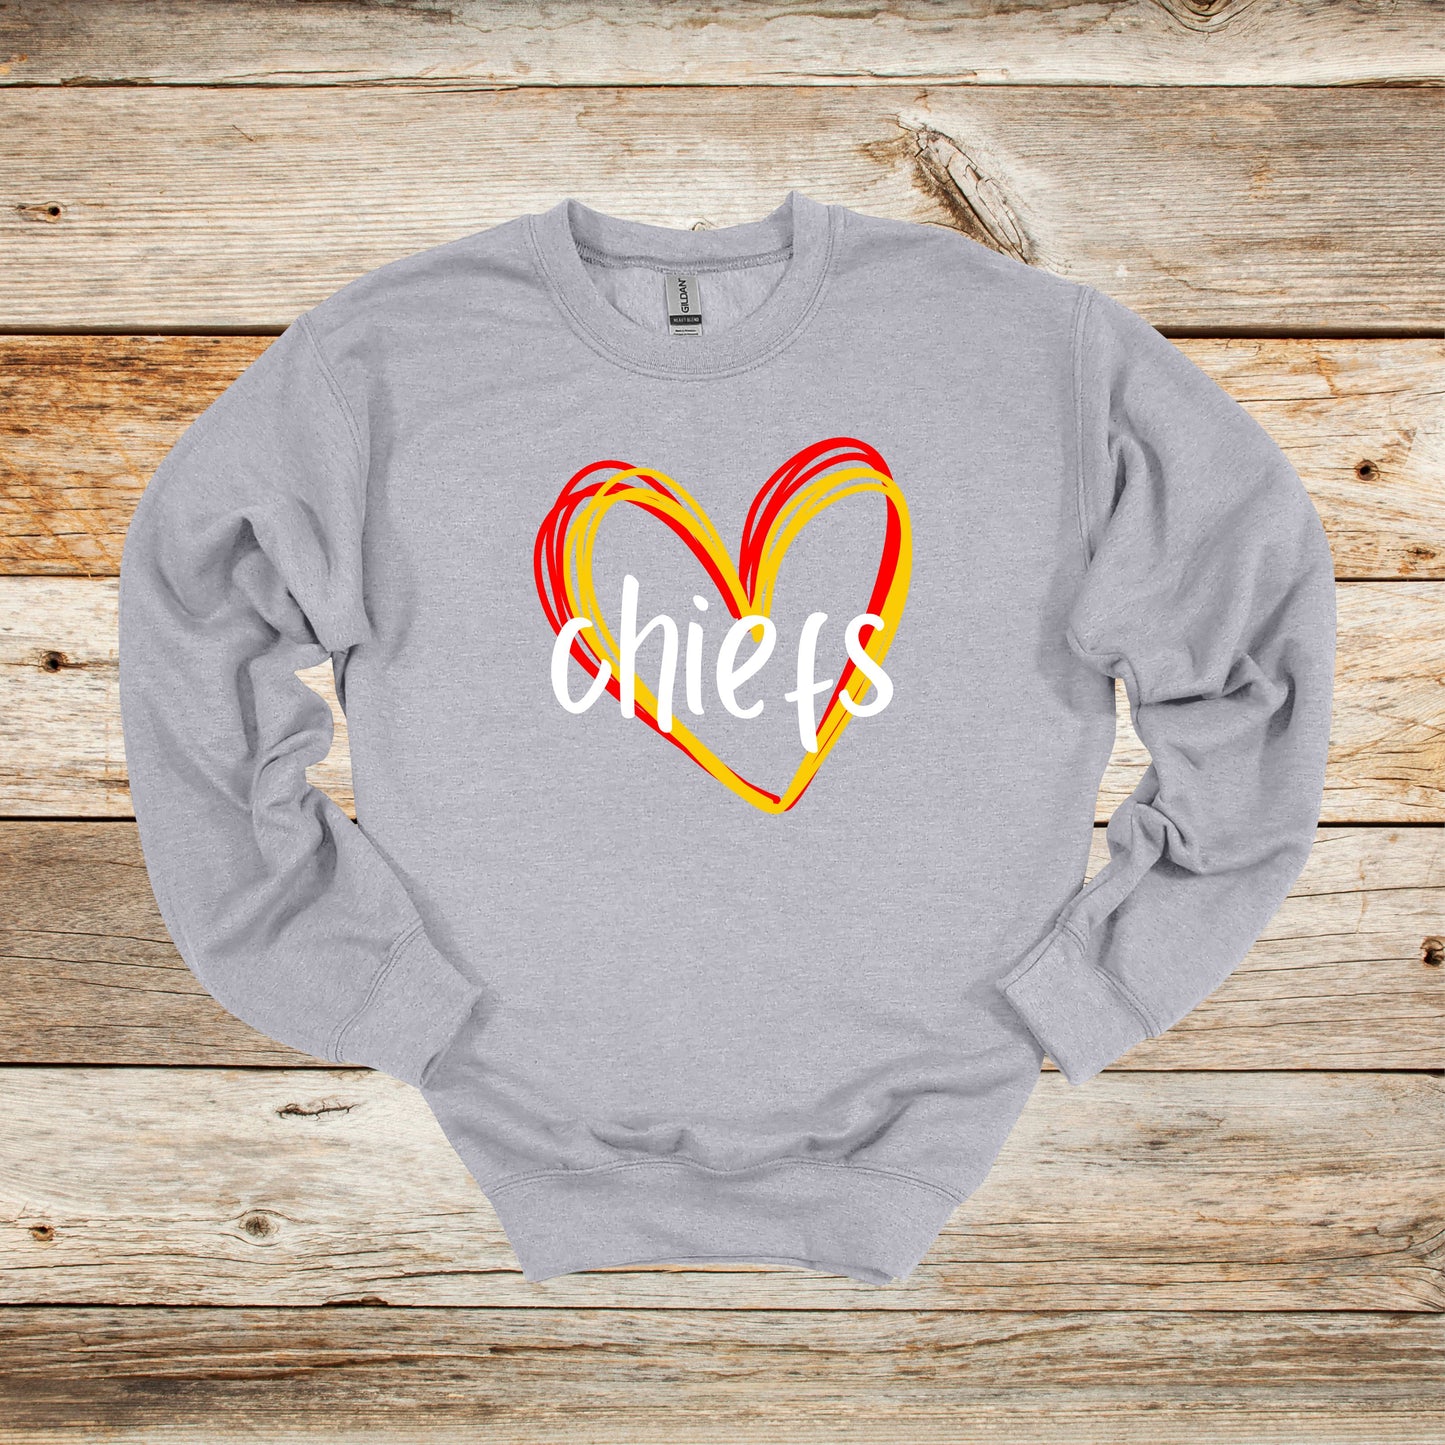 Football Crewneck and Hooded Sweatshirt - Chiefs Football - Adult and Children's Tee Shirts - Sports Hooded Sweatshirt Graphic Avenue Crewneck Sweatshirt Sport Grey Adult Small